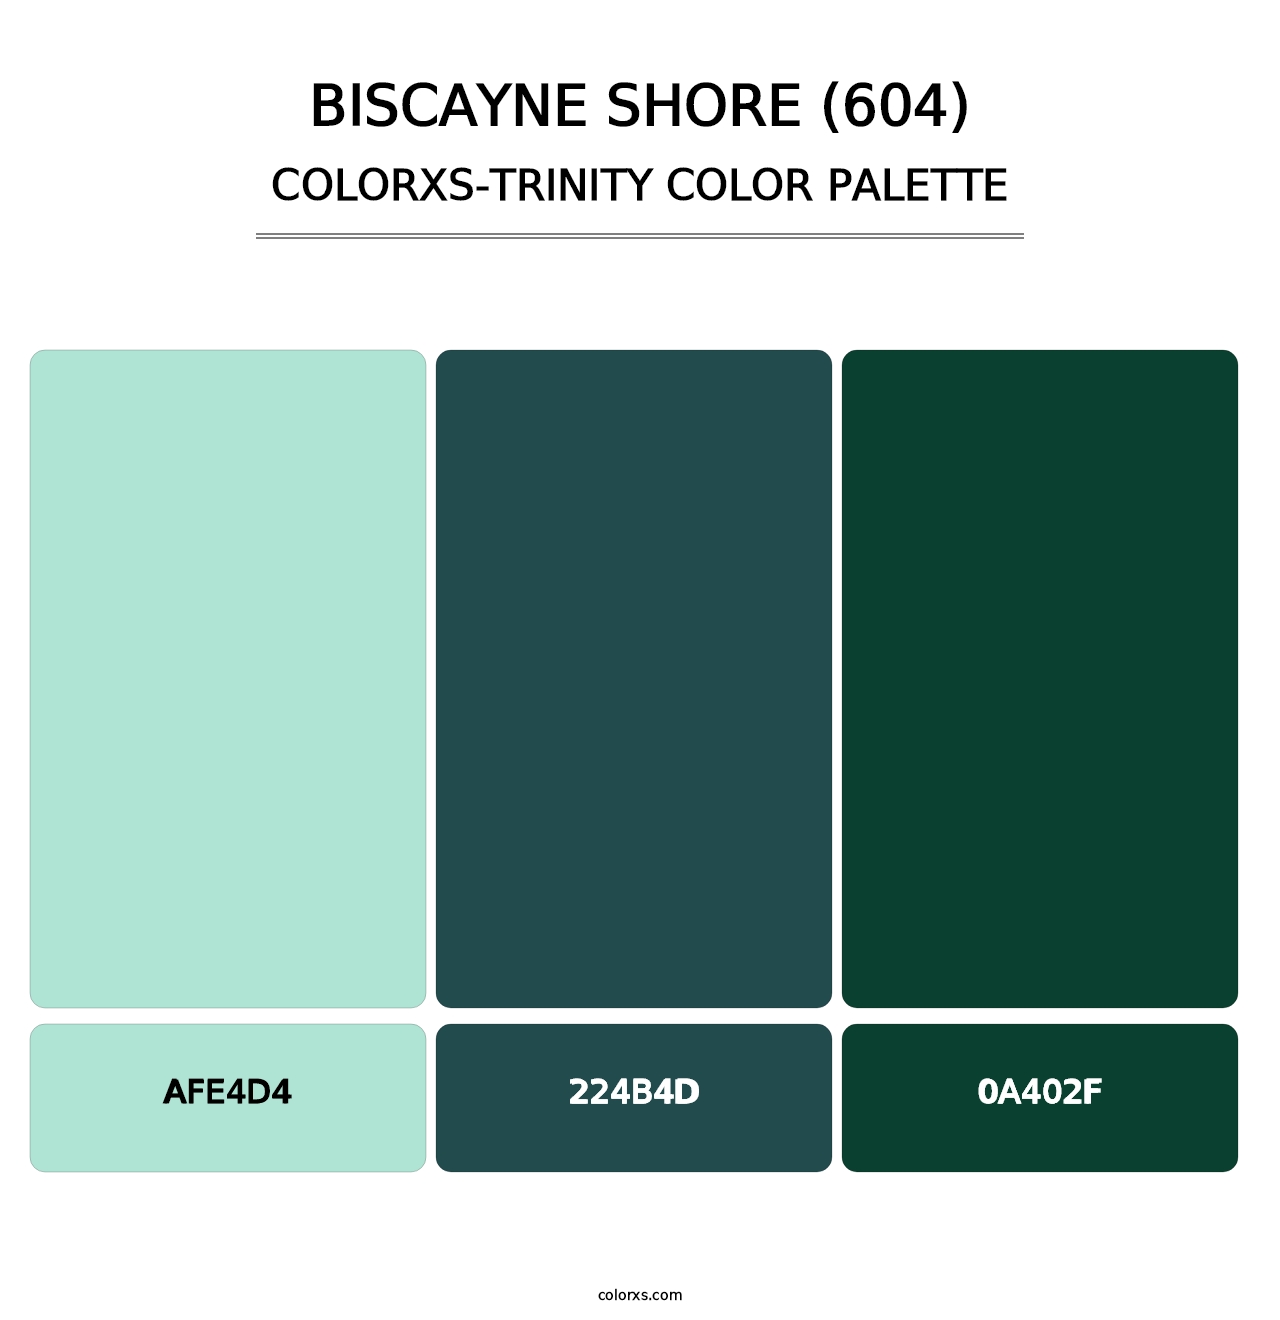 Biscayne Shore (604) - Colorxs Trinity Palette